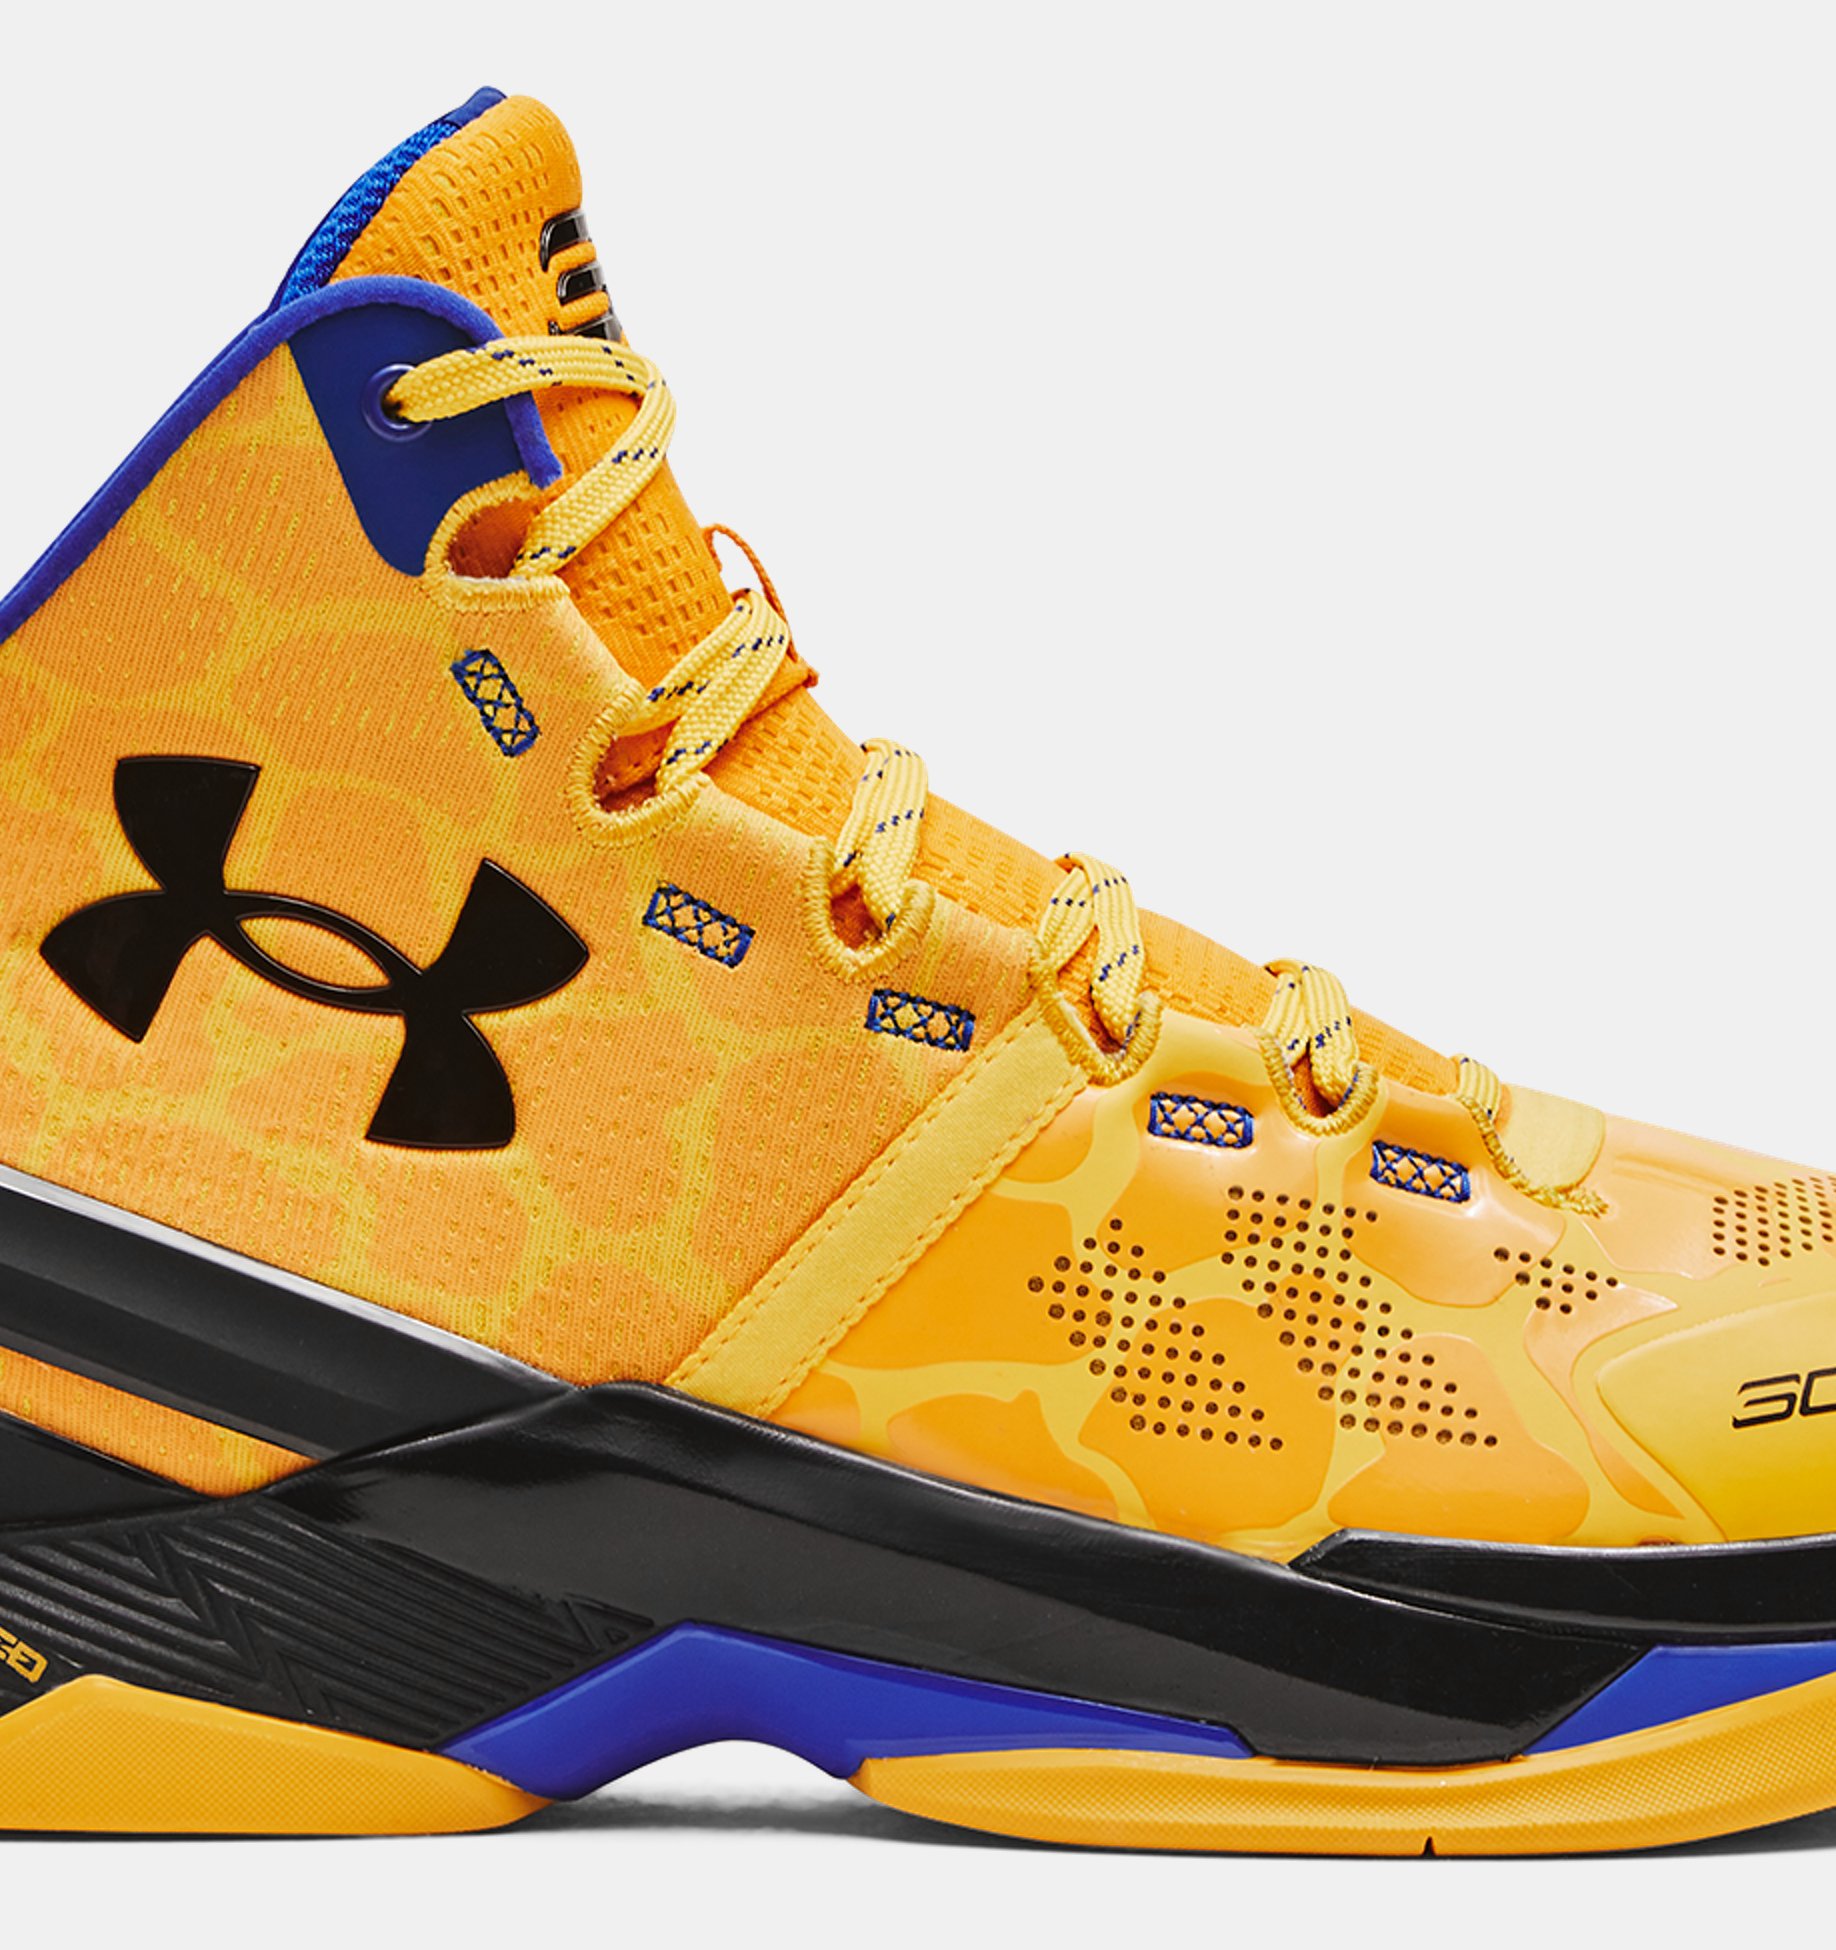 How Much is Stephen Curry Under Armour Shoes?